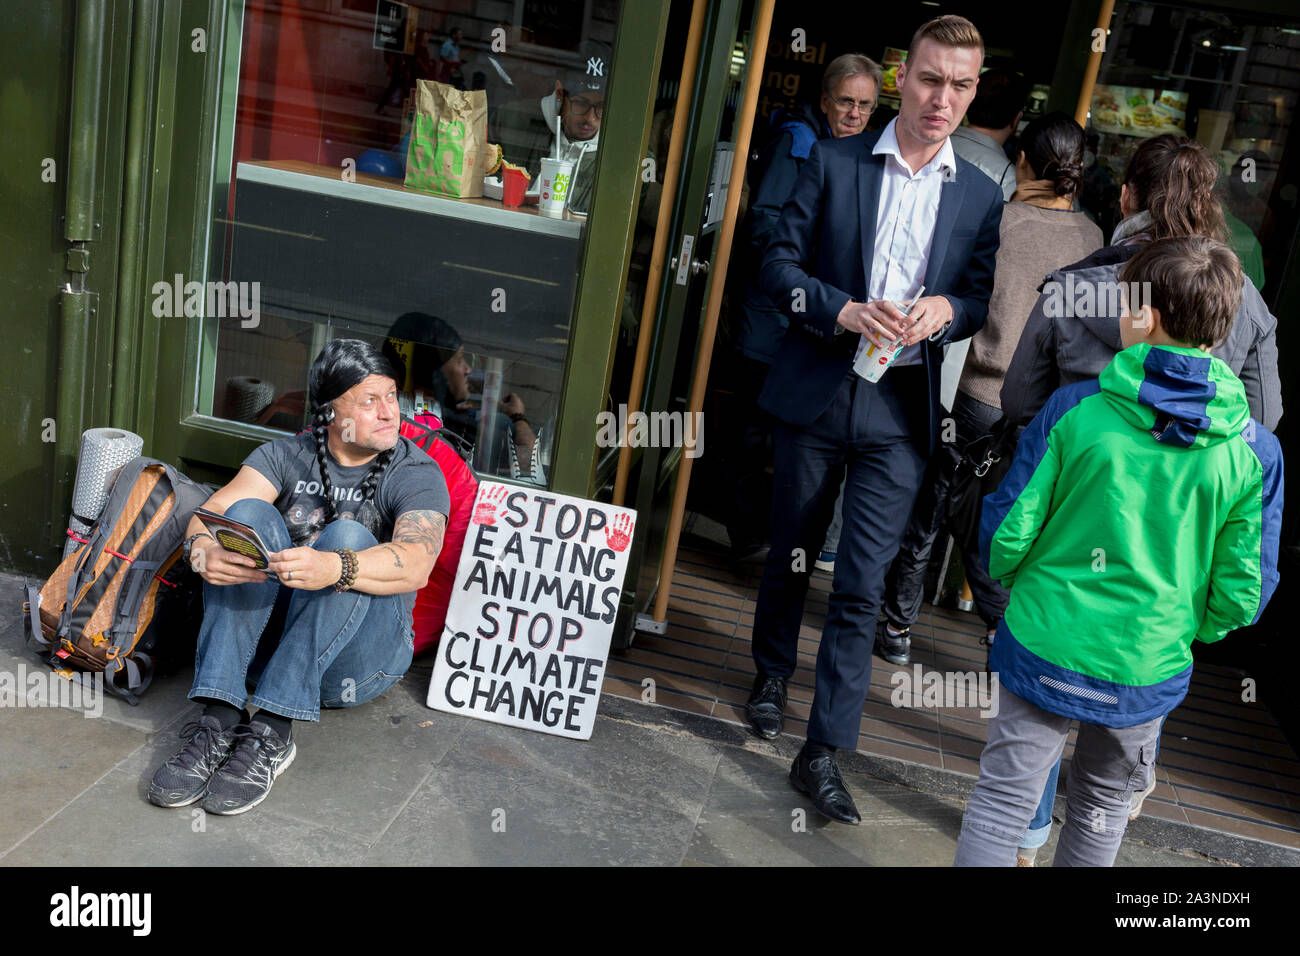 A food science protester sits outside a McDonalds restaurant in Whitehall during the environmental protest about Climate Change occupation of Trafalgar Square in central London, the third day of a two-week prolonged worldwide protest by members of Extinction Rebellion, on 9th October 2019, in London, England. Stock Photo